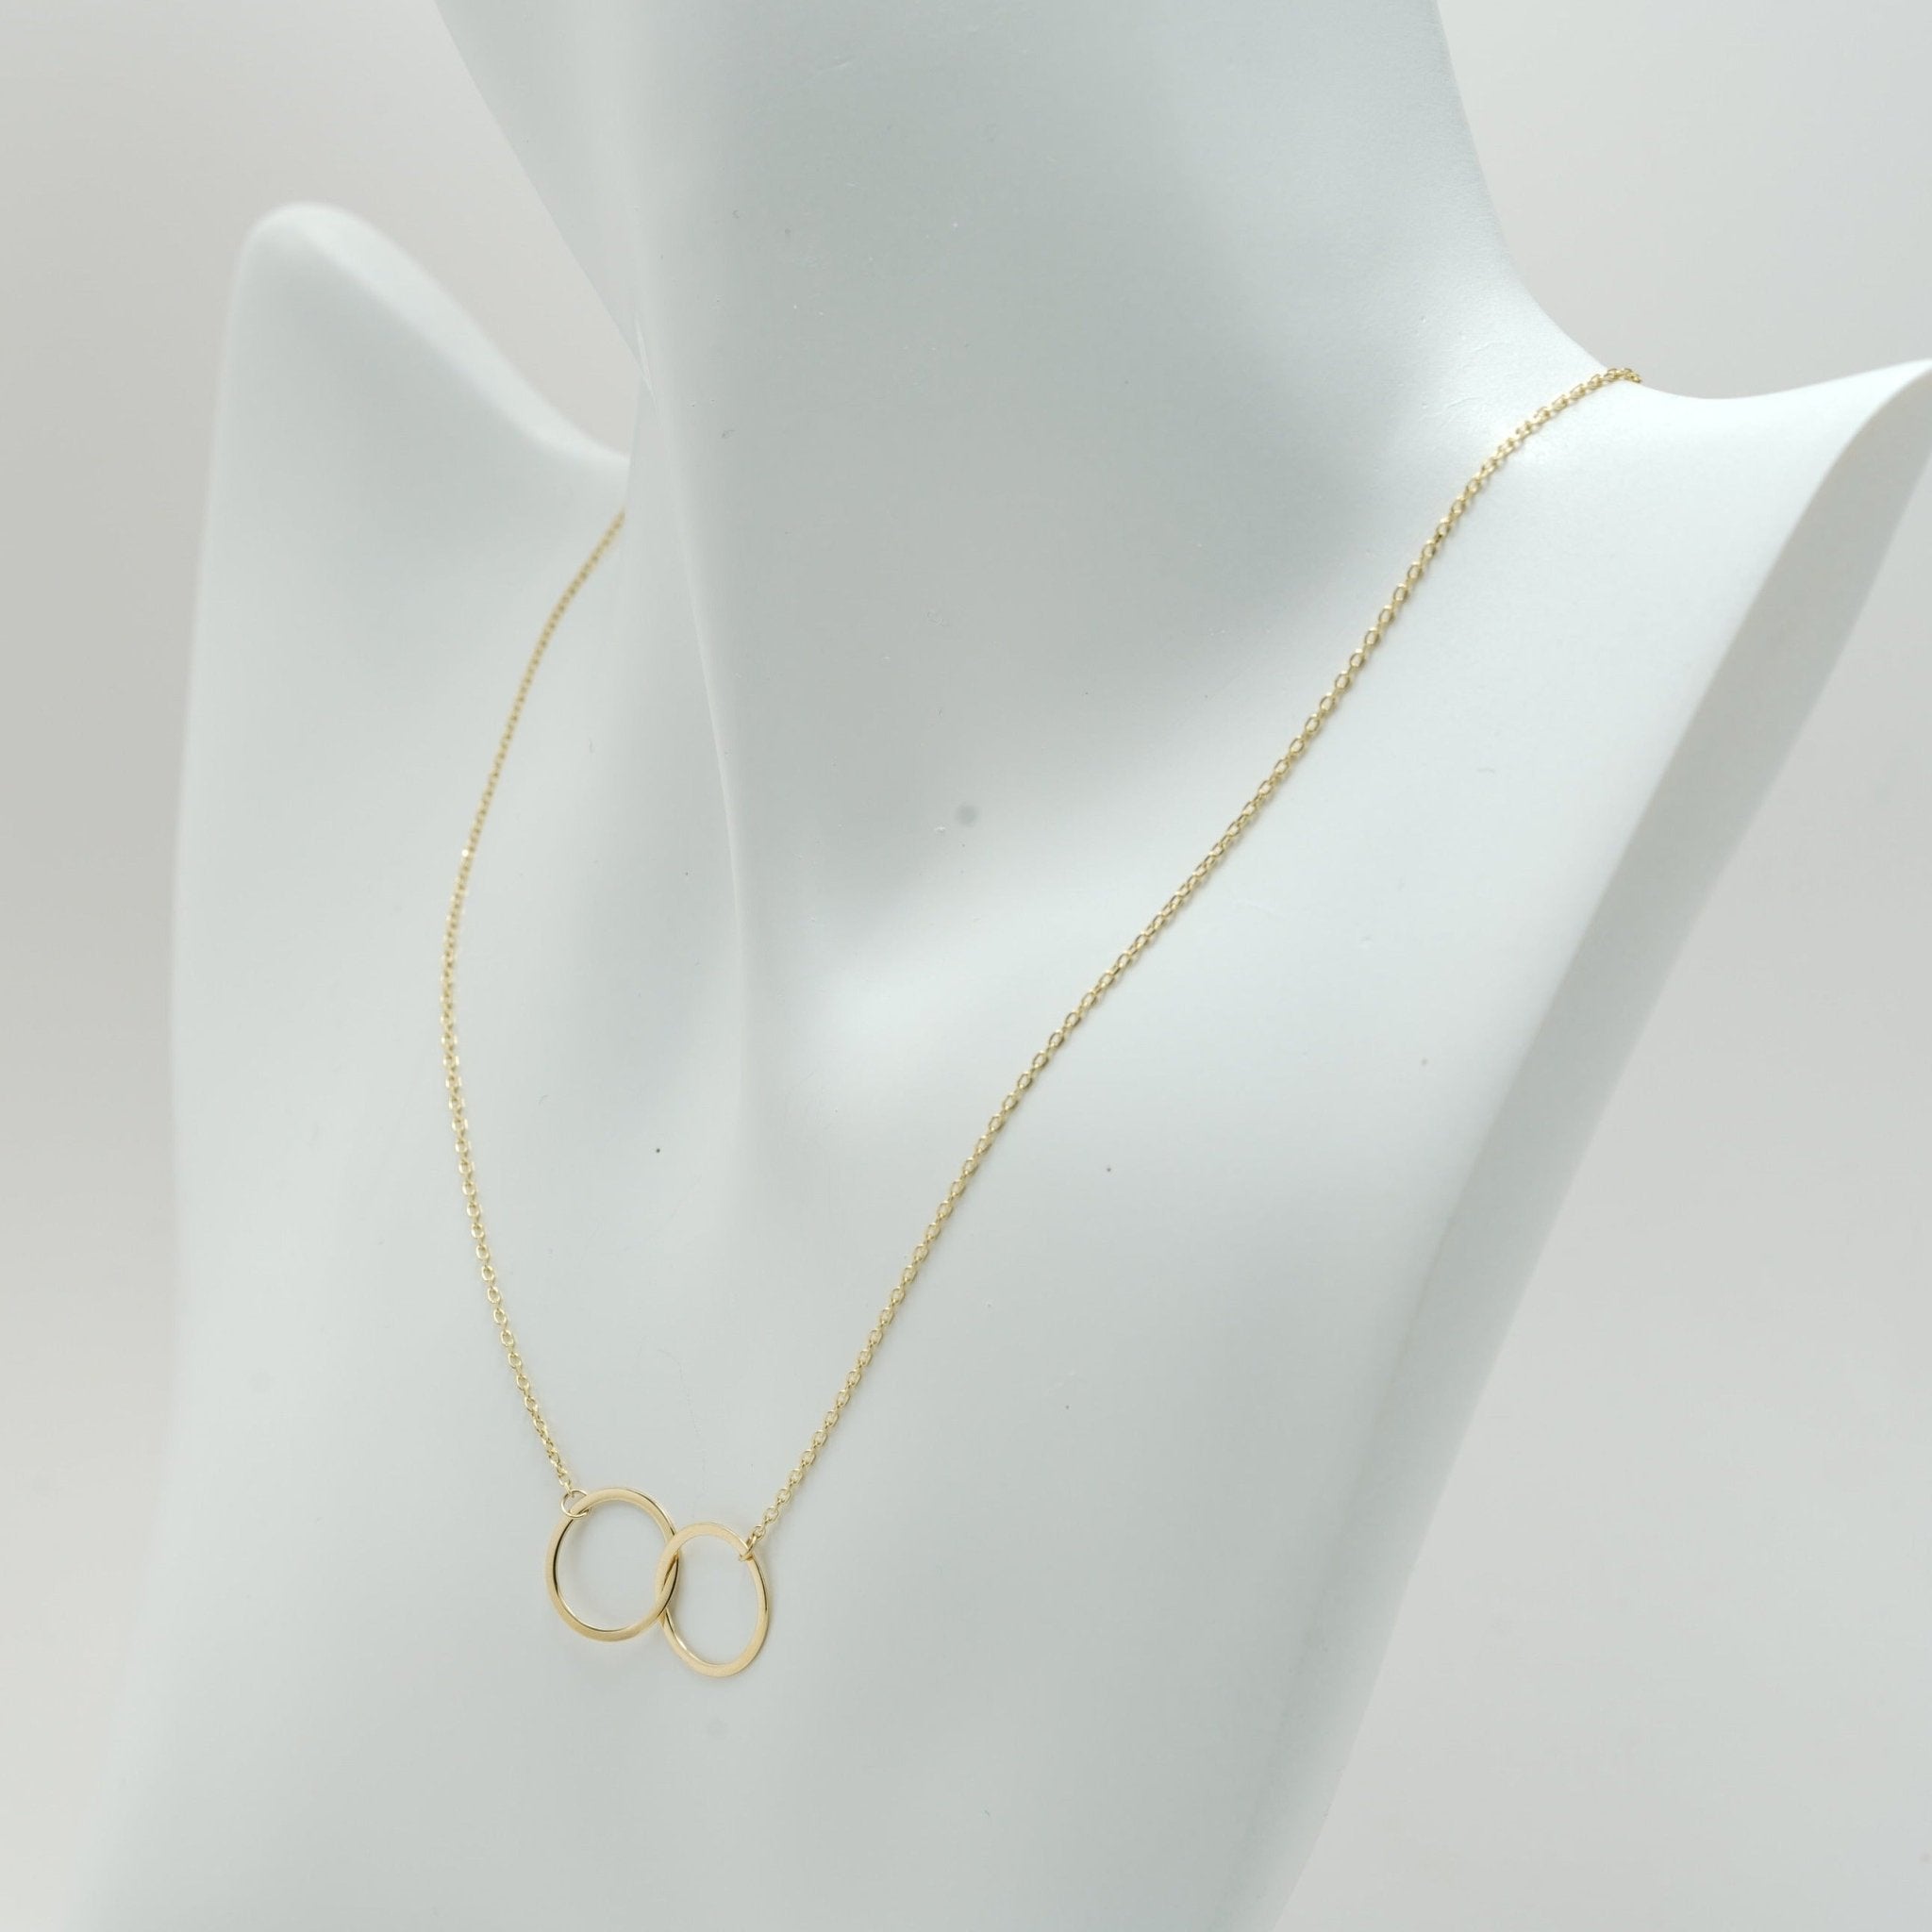 Buy AYESHA Circular Mini Pendant Gold-Toned Dainty Necklace | Shoppers Stop